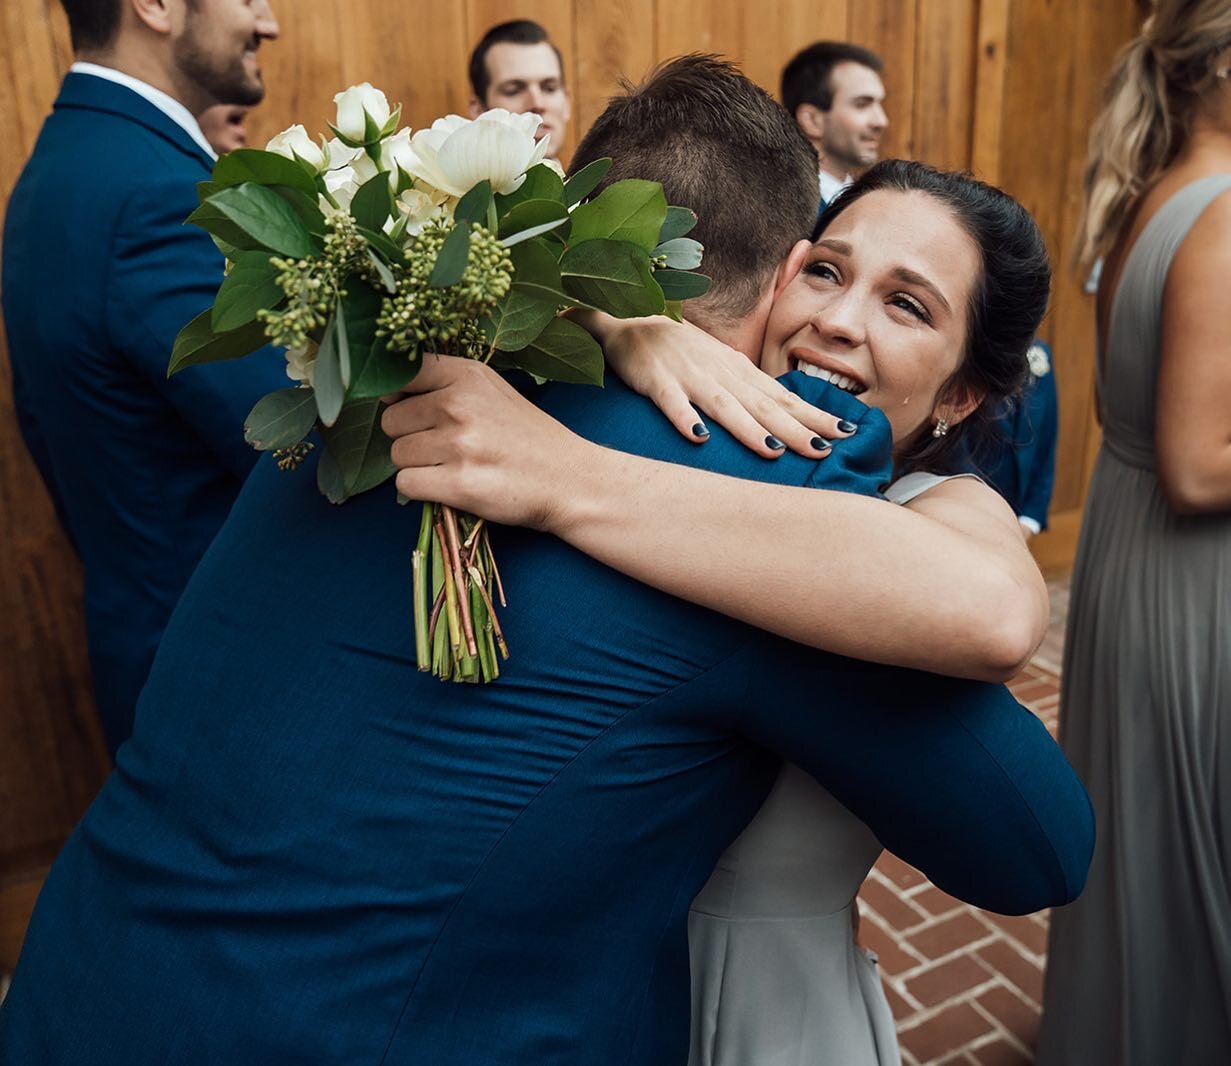 Leah&rsquo;s sister hugging Ben in the moments after their wedding ceremony 🥹 watching your sister marry her person and knowing she&rsquo;ll always be loved as she should is a feeling like no other!